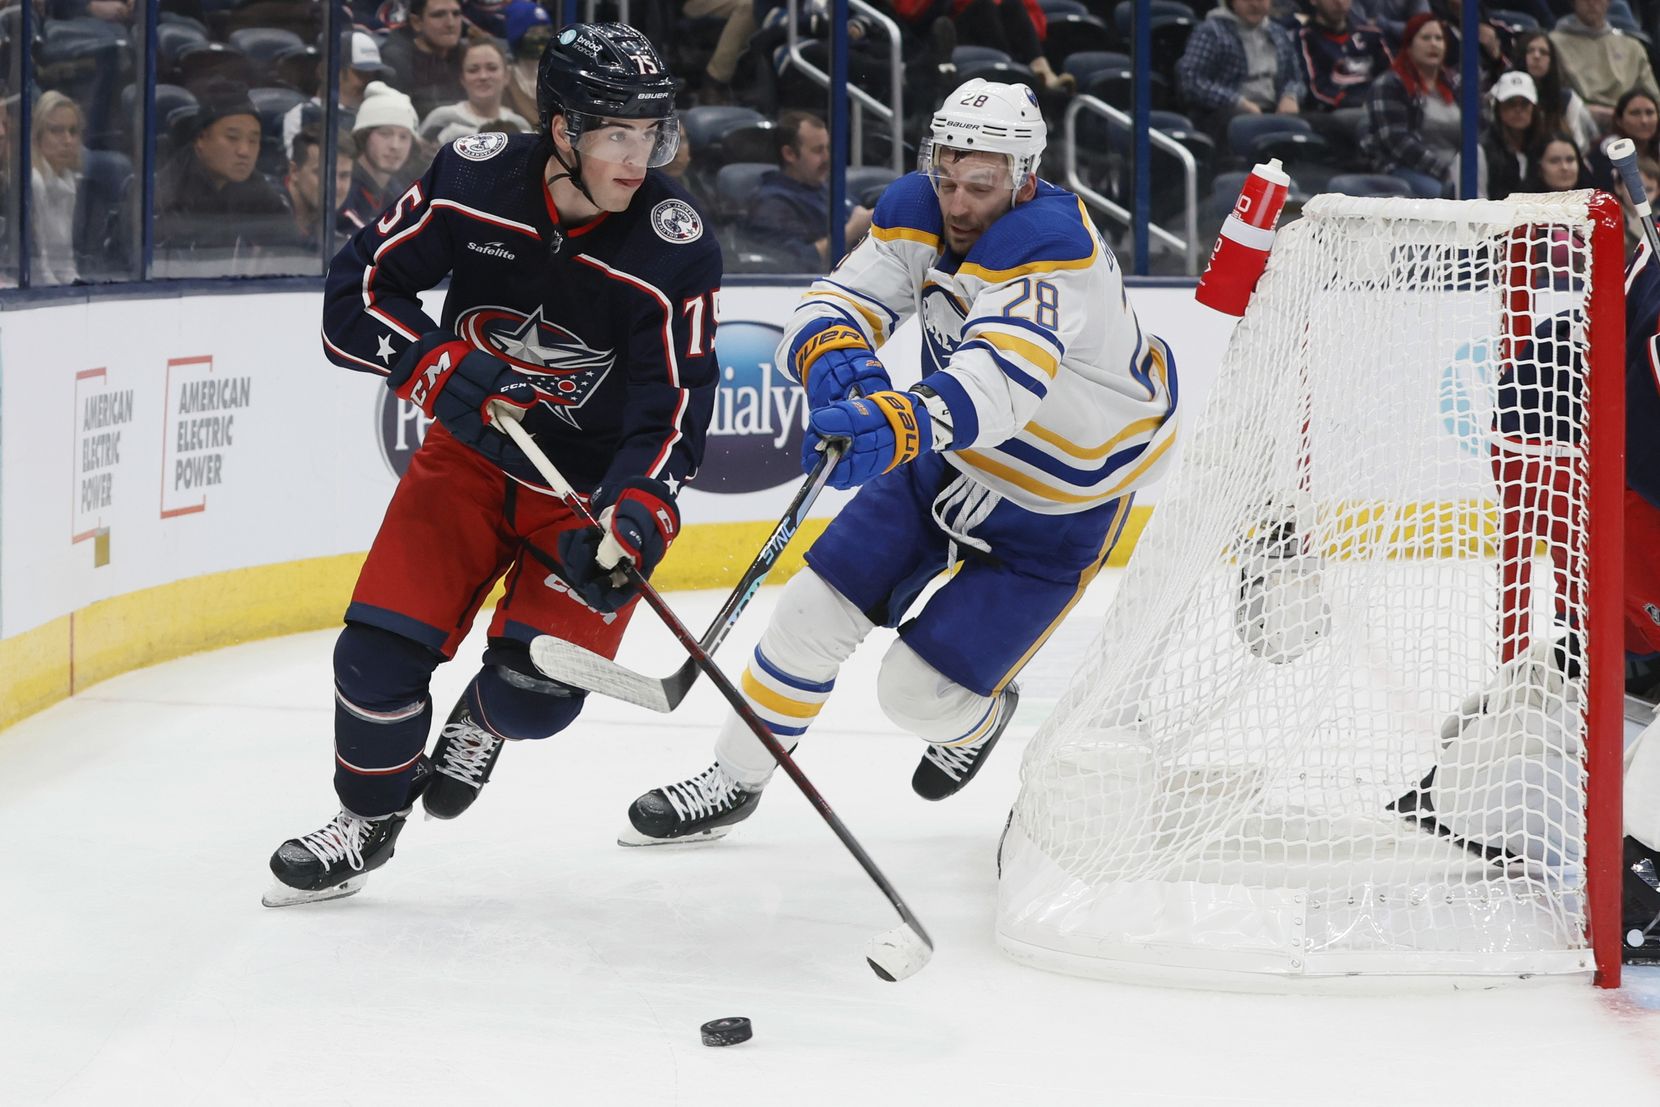 Columbus Blue Jackets' Tim Berni, left, is defended by Buffalo Sabres' Zemgus Girgensons during the third period of an NHL hockey game on Wednesday, Dec. 7, 2022, in Columbus, Ohio. (AP Photo/Jay LaPrete)nTim Berni,Zemgus Girgensons